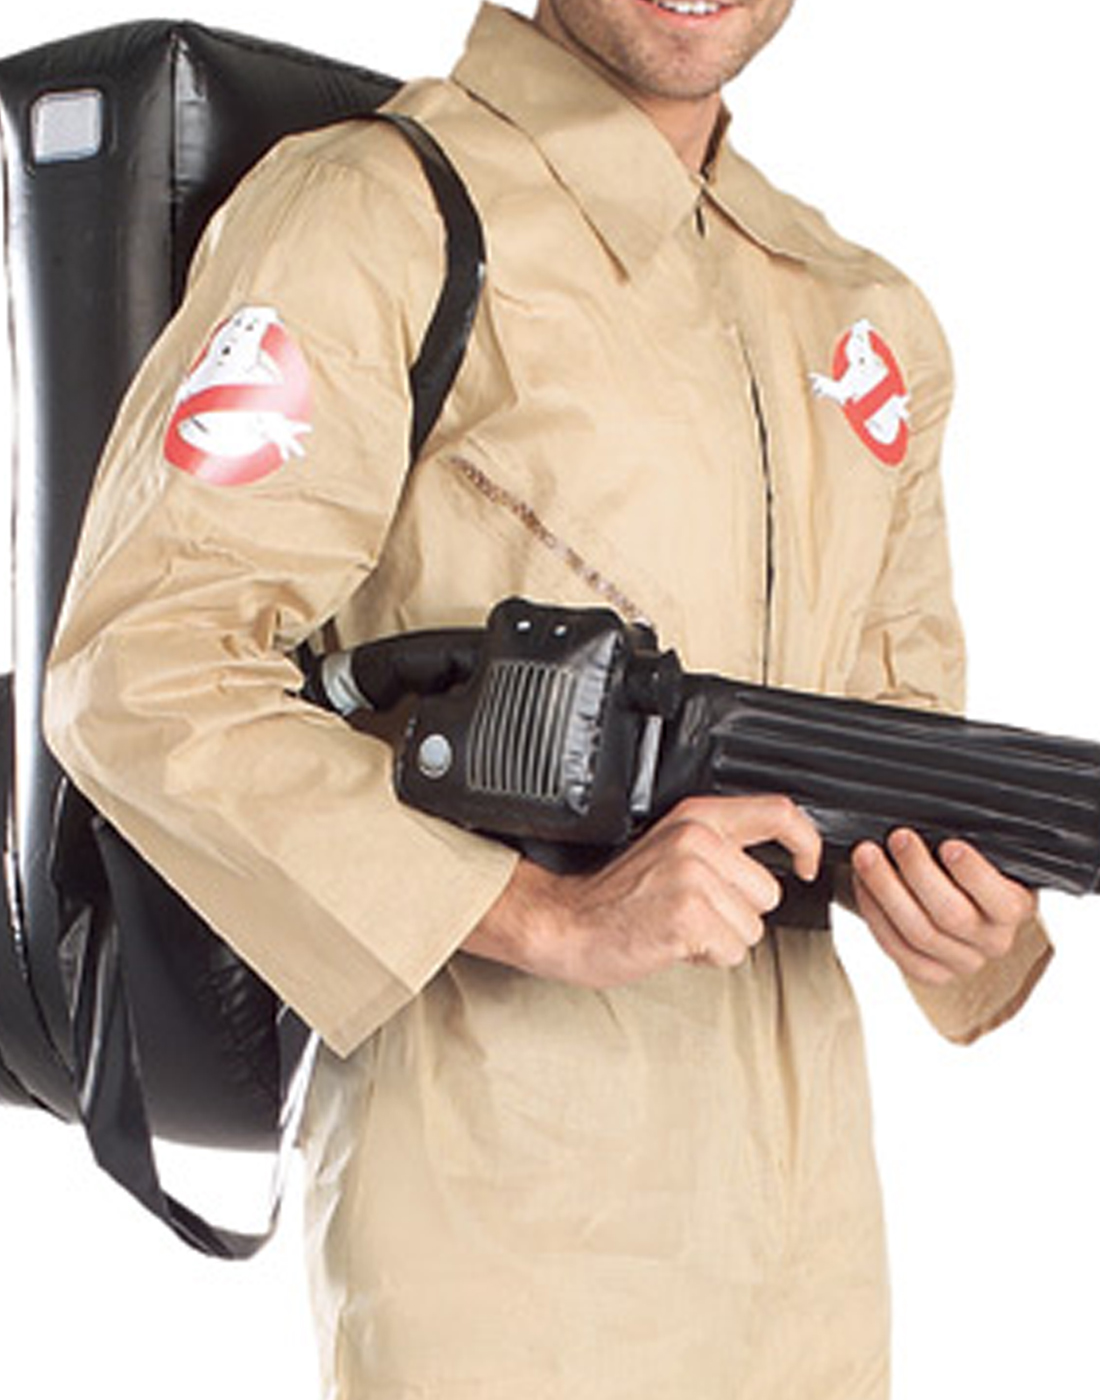 Rubie's Ghostbusters Peter Venkman Men's Halloween Fancy-Dress Costume for Adult, One Size - image 4 of 4